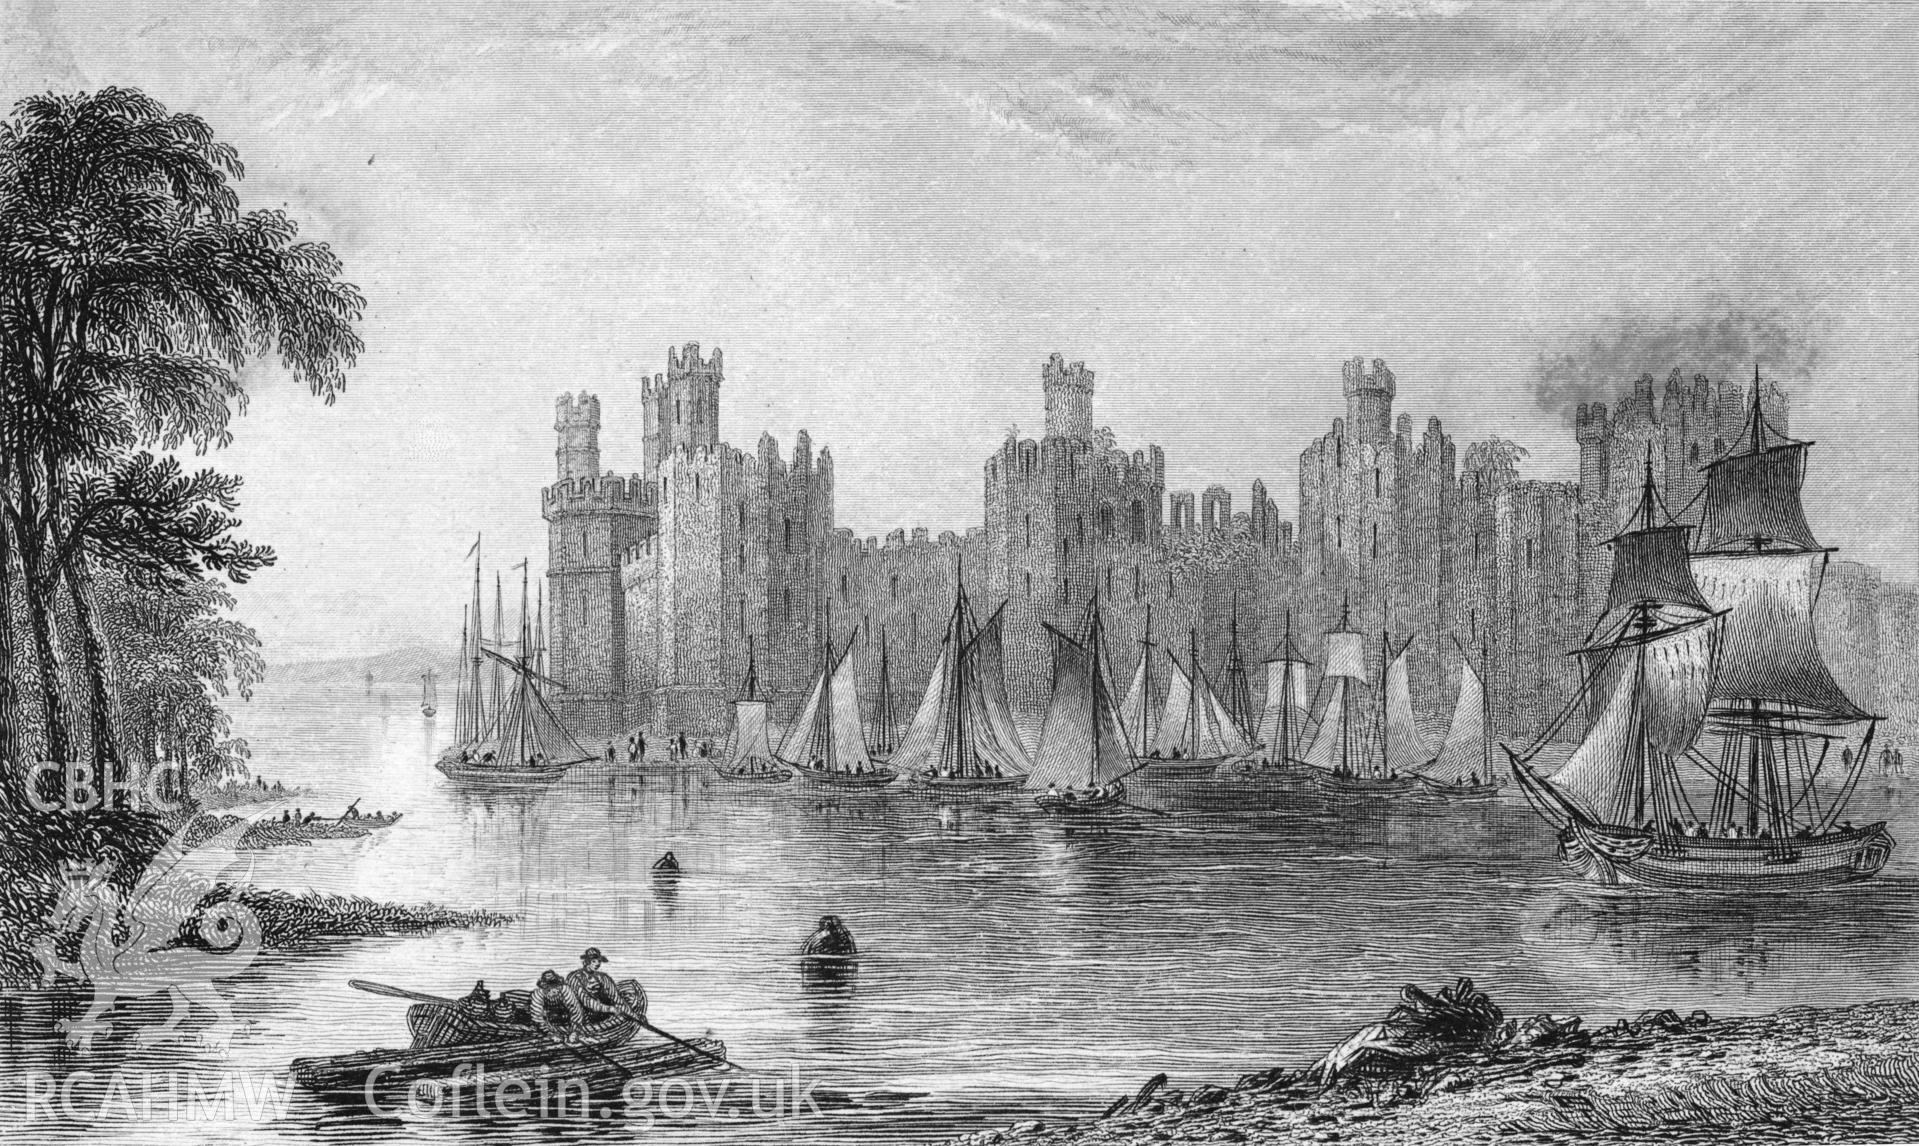 Caernarfon Castle; undated engraving showing quayside of the entrance to Afon Seiont. with Caernarfon Castle in the background and a variety of sailing craft with sails partially spread.